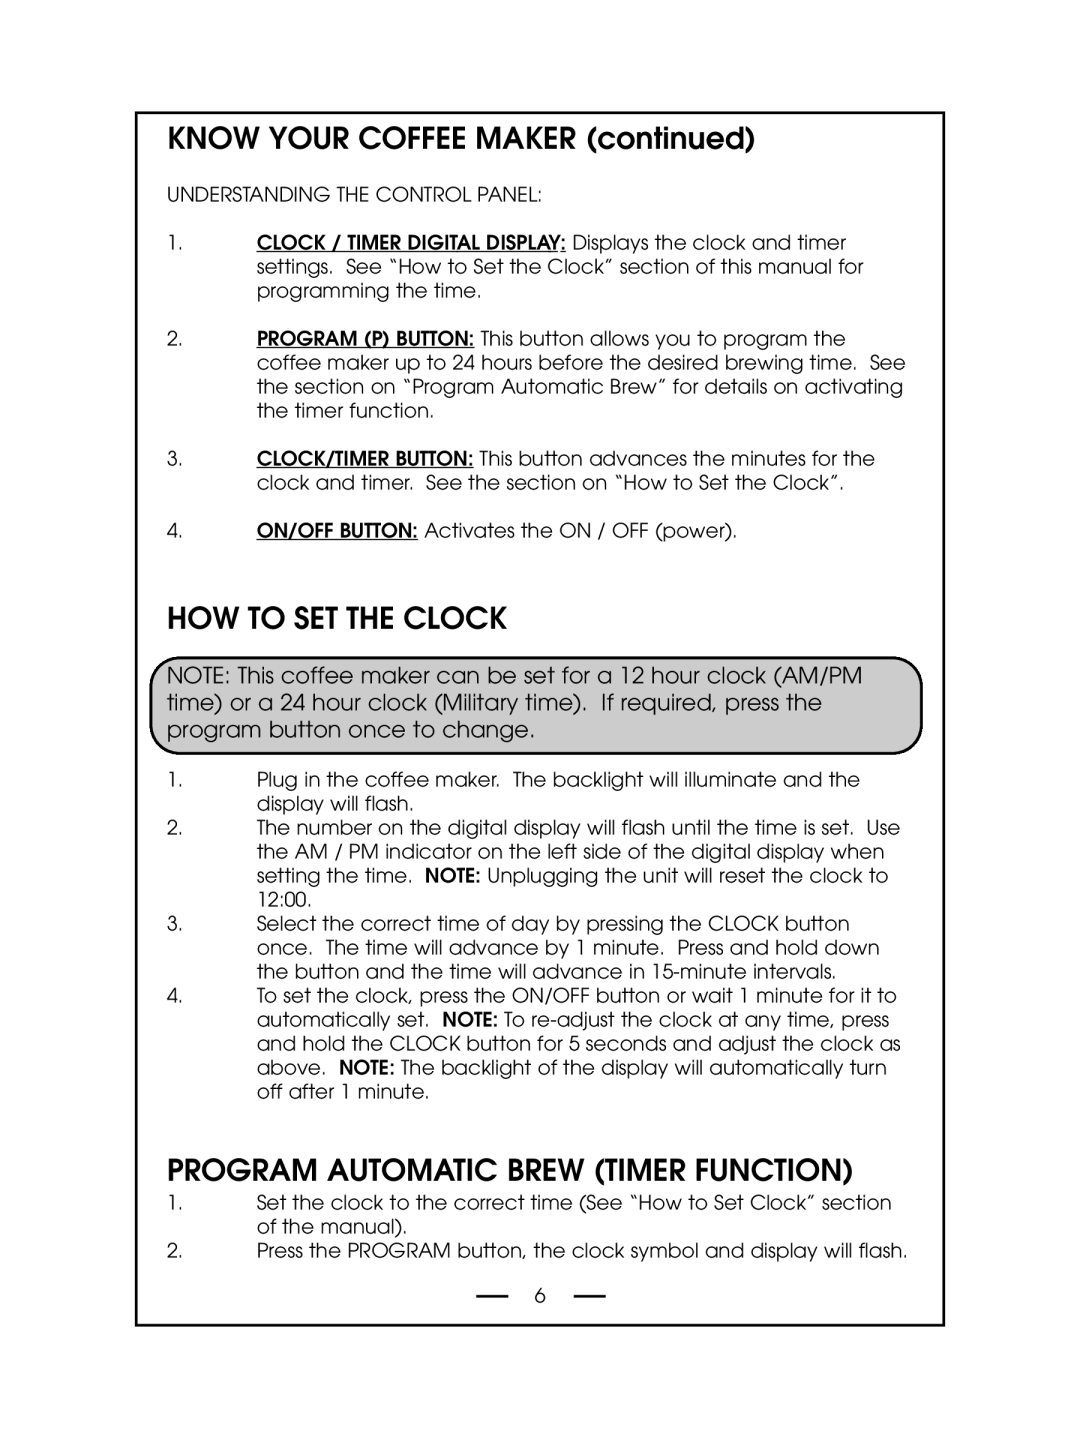 DeLonghi DCM485 How To Set The Clock, Program Automatic Brew Timer Function, KNOW YOUR COFFEE MAKER continued 